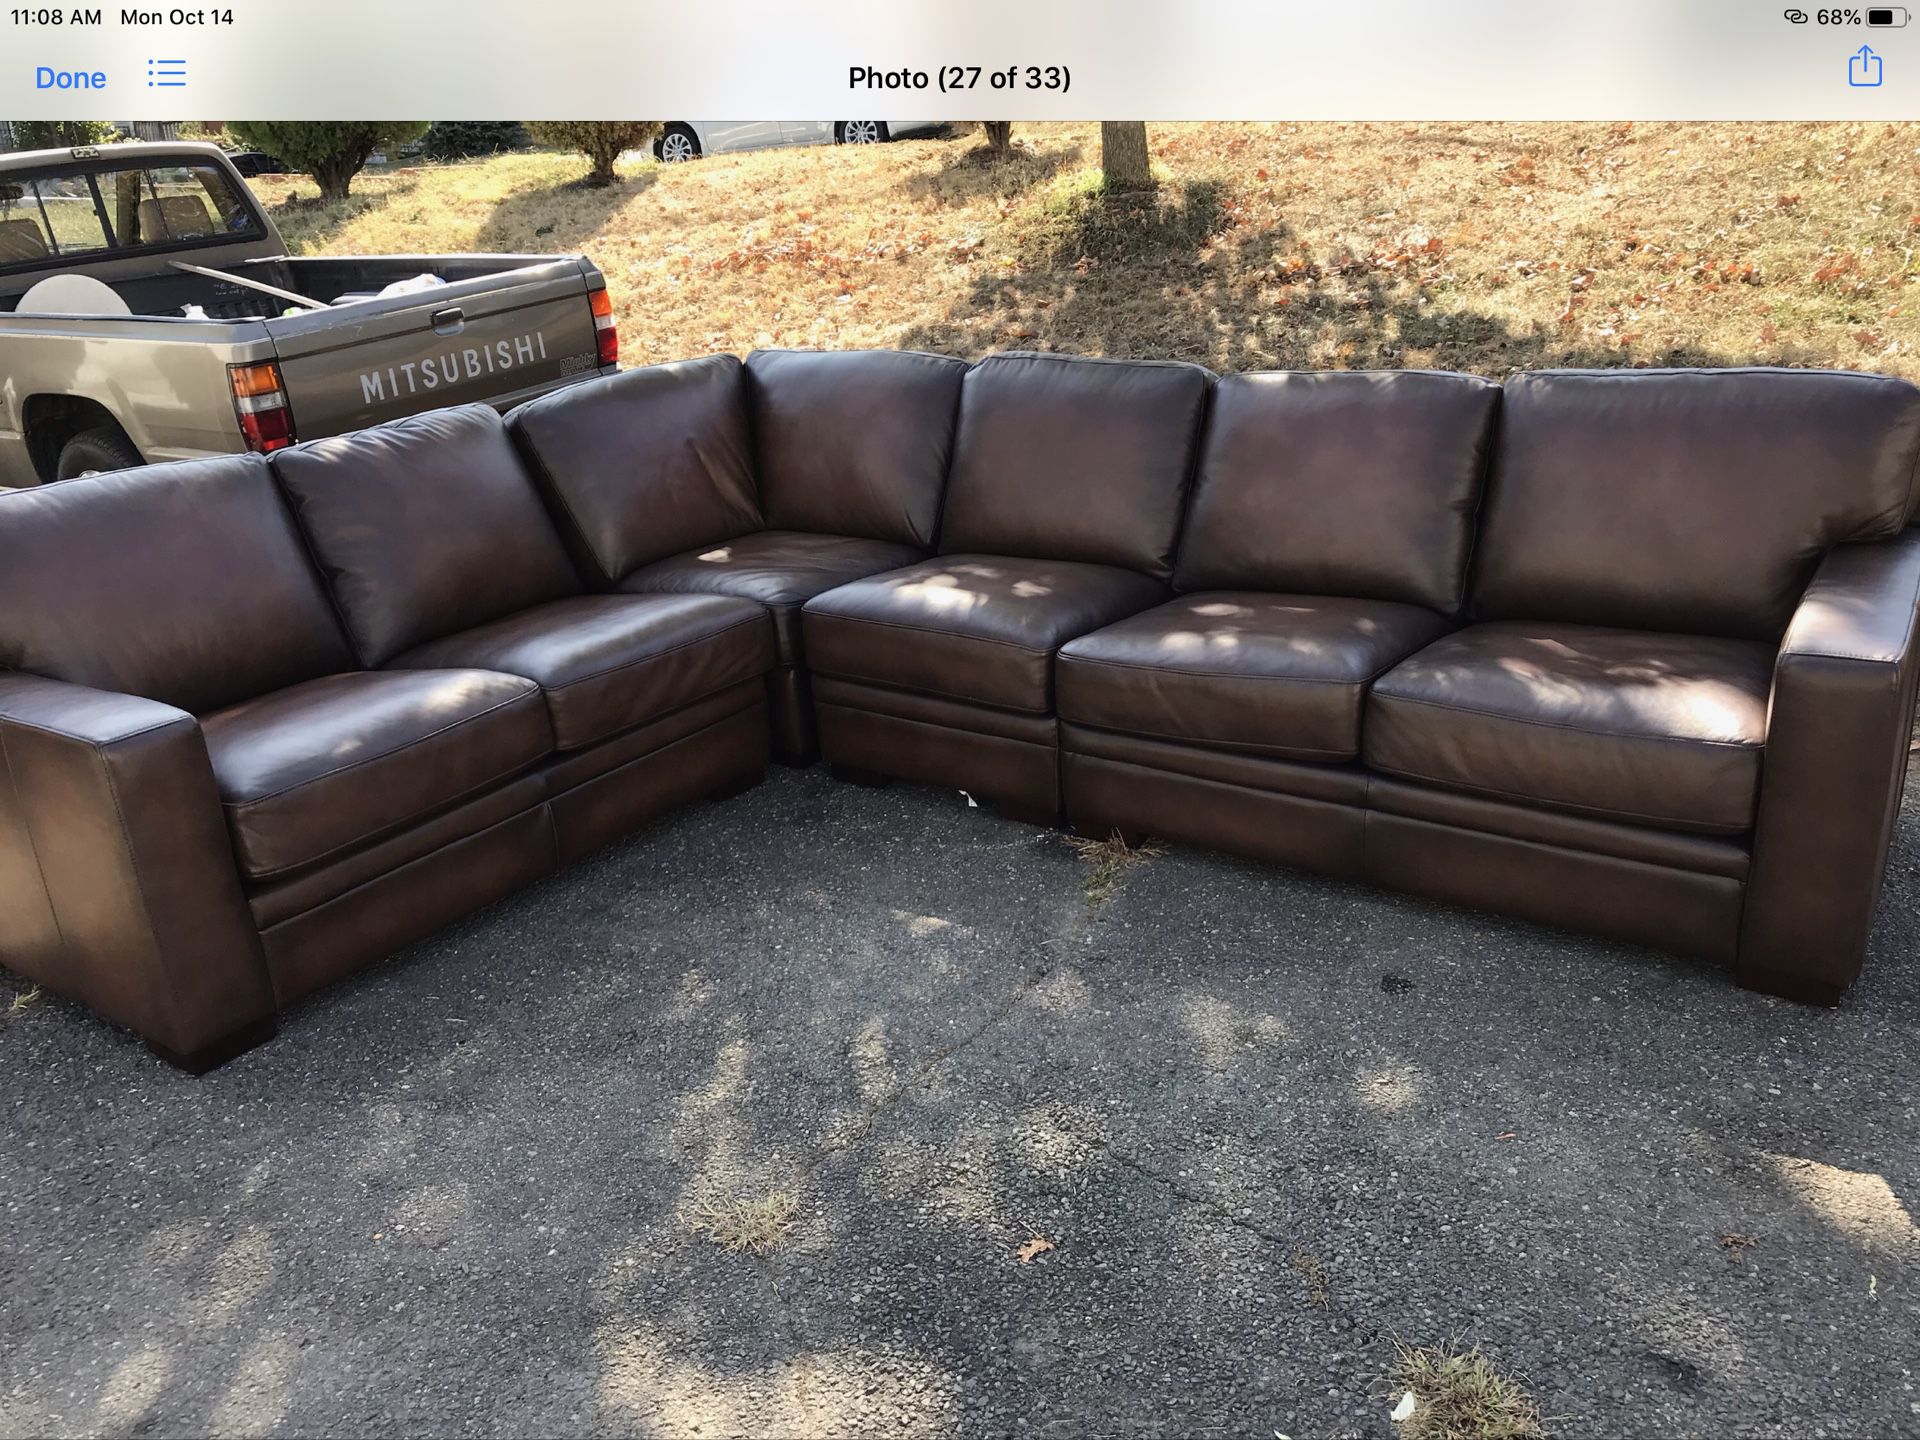 L shape leather brown couch in great shape